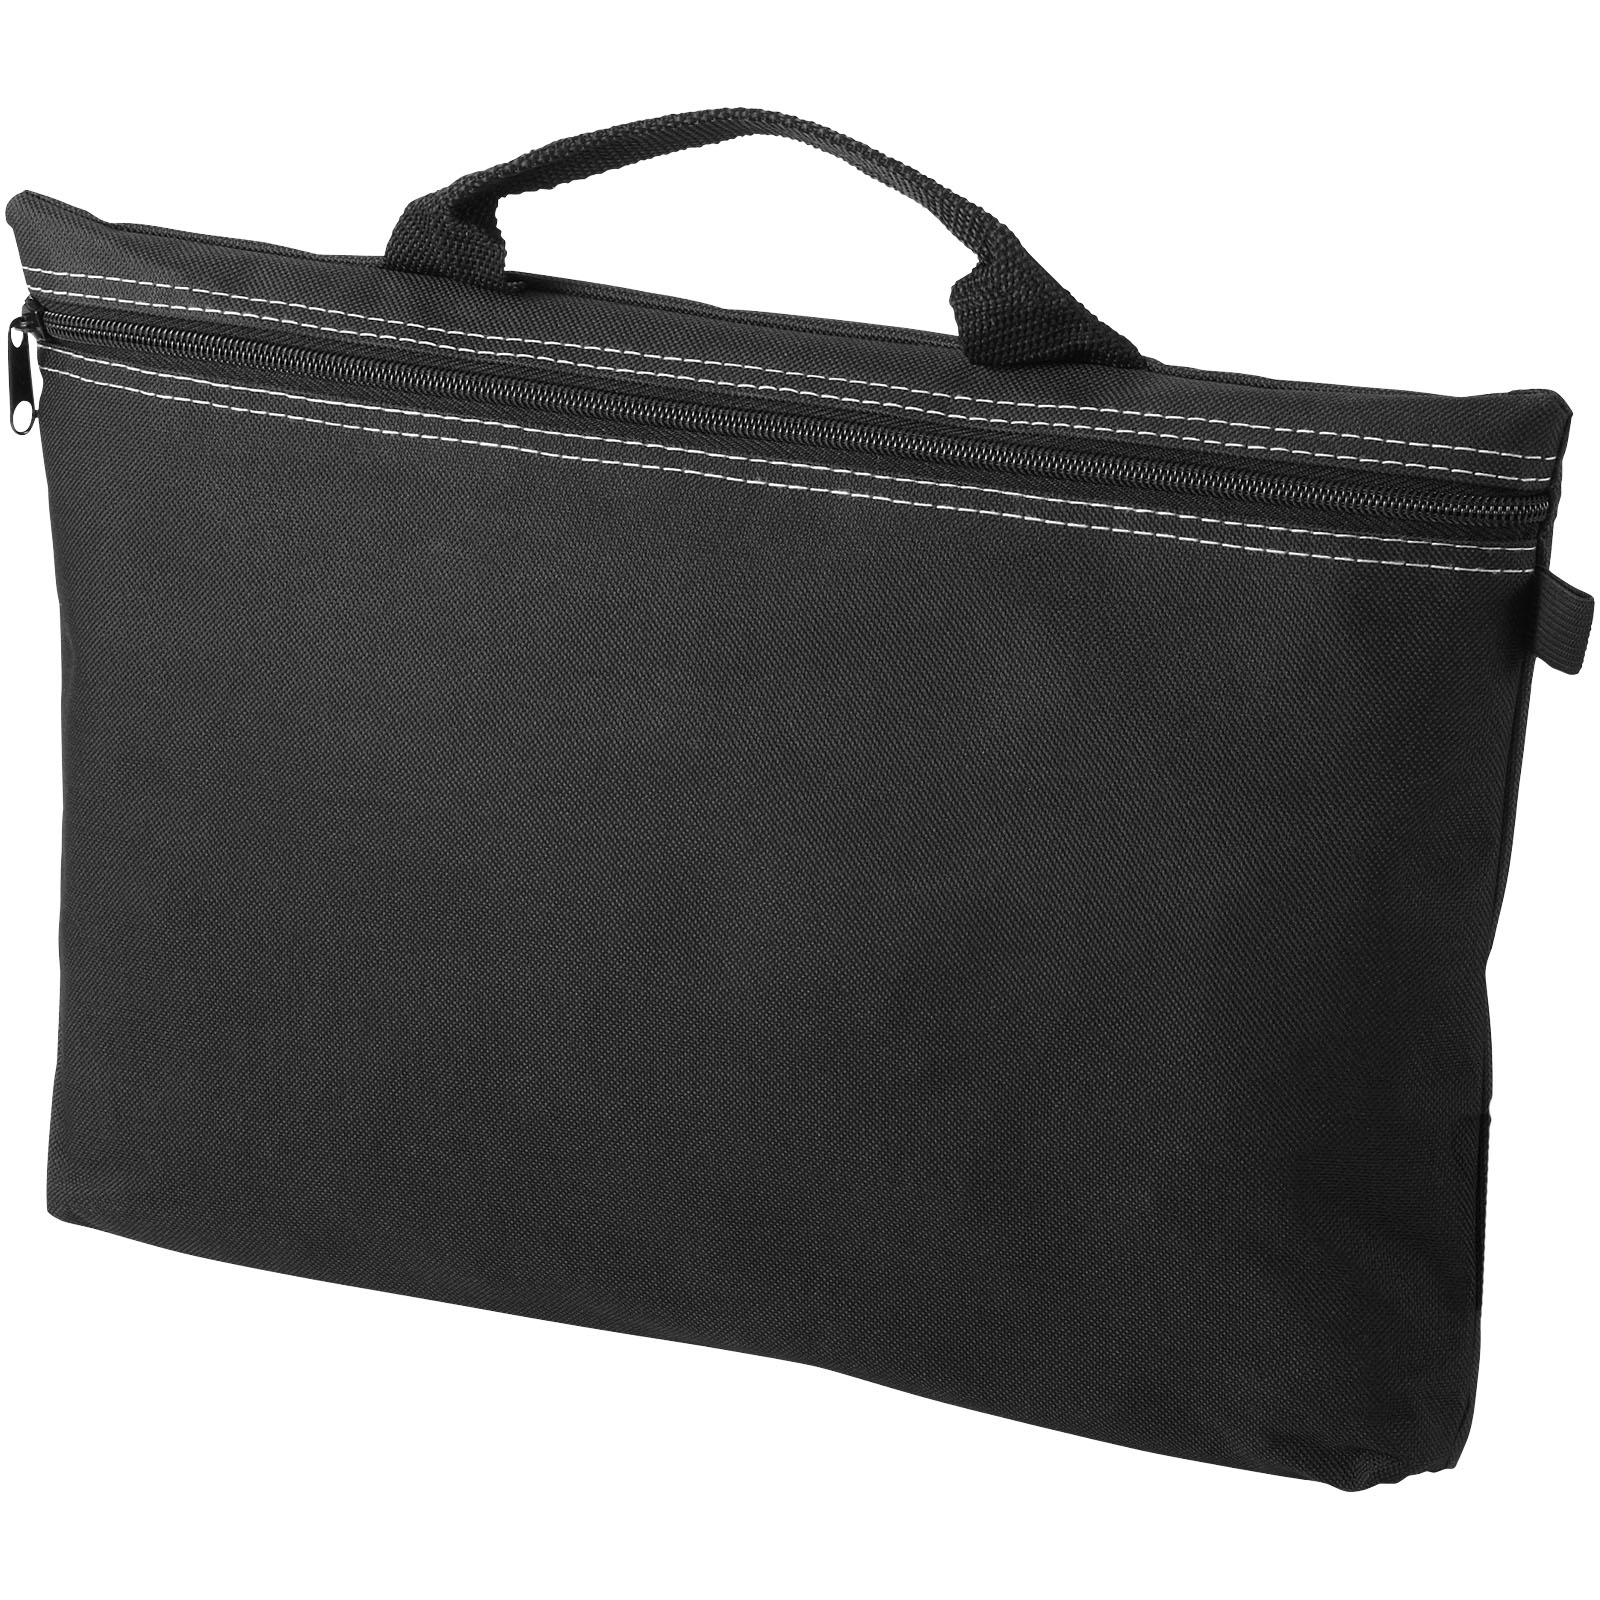 Conference bags - Orlando conference bag 3L